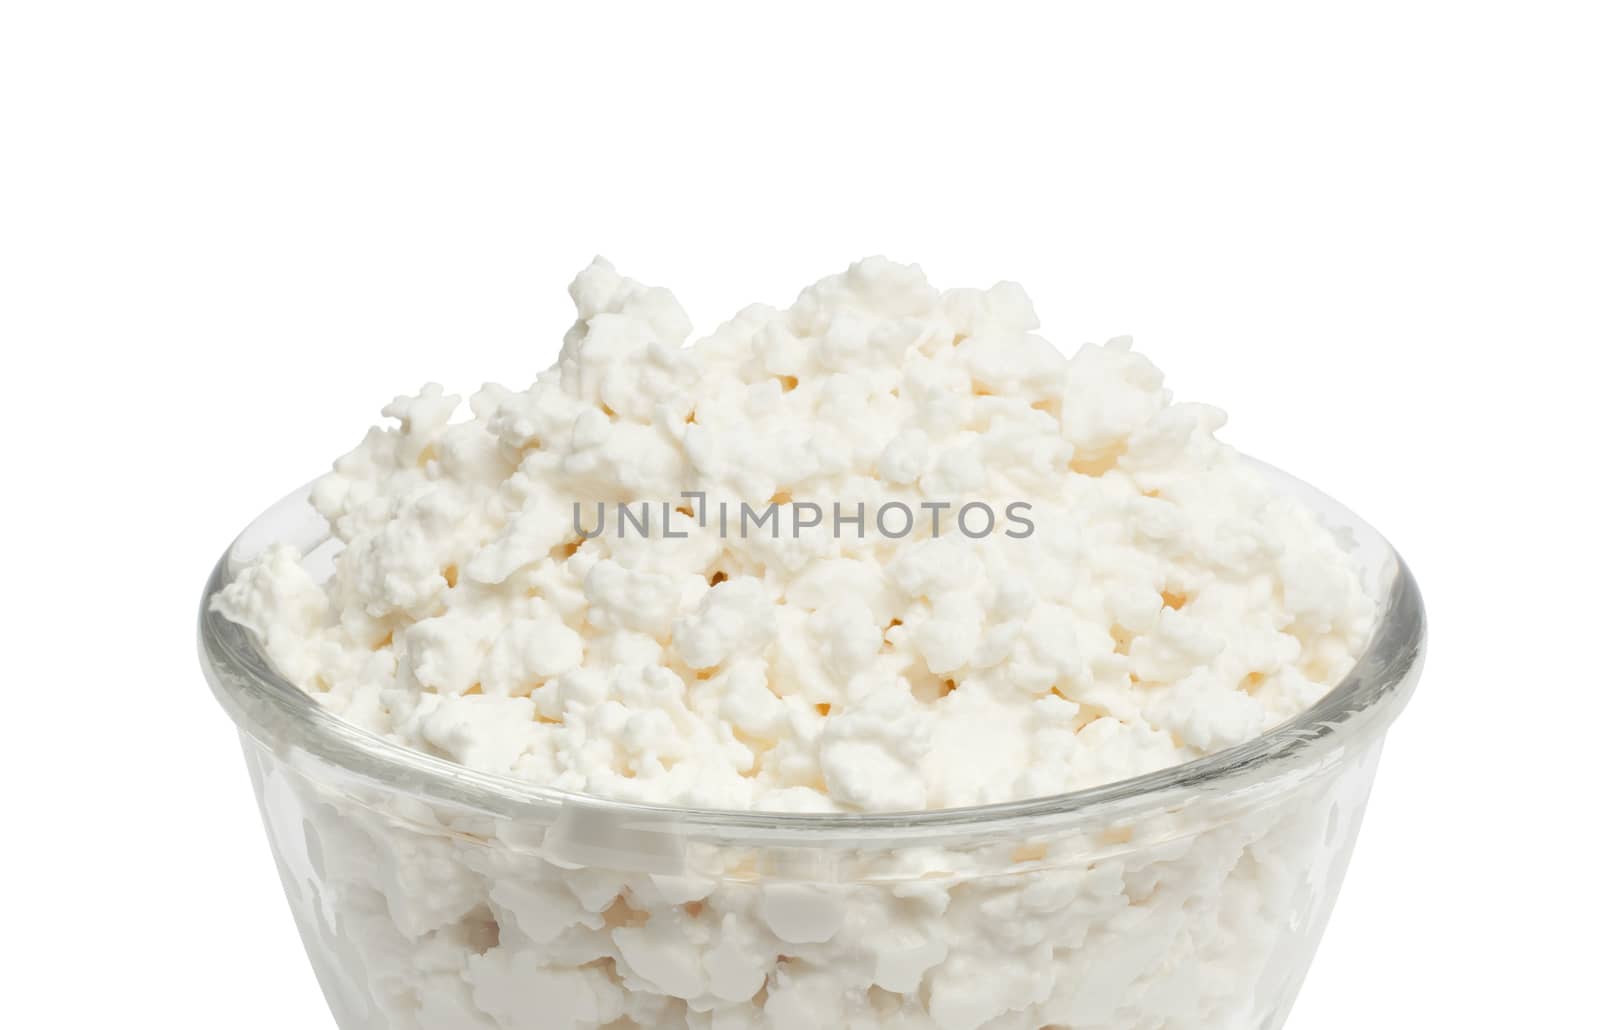 Cottage cheese in plate isolated on white background